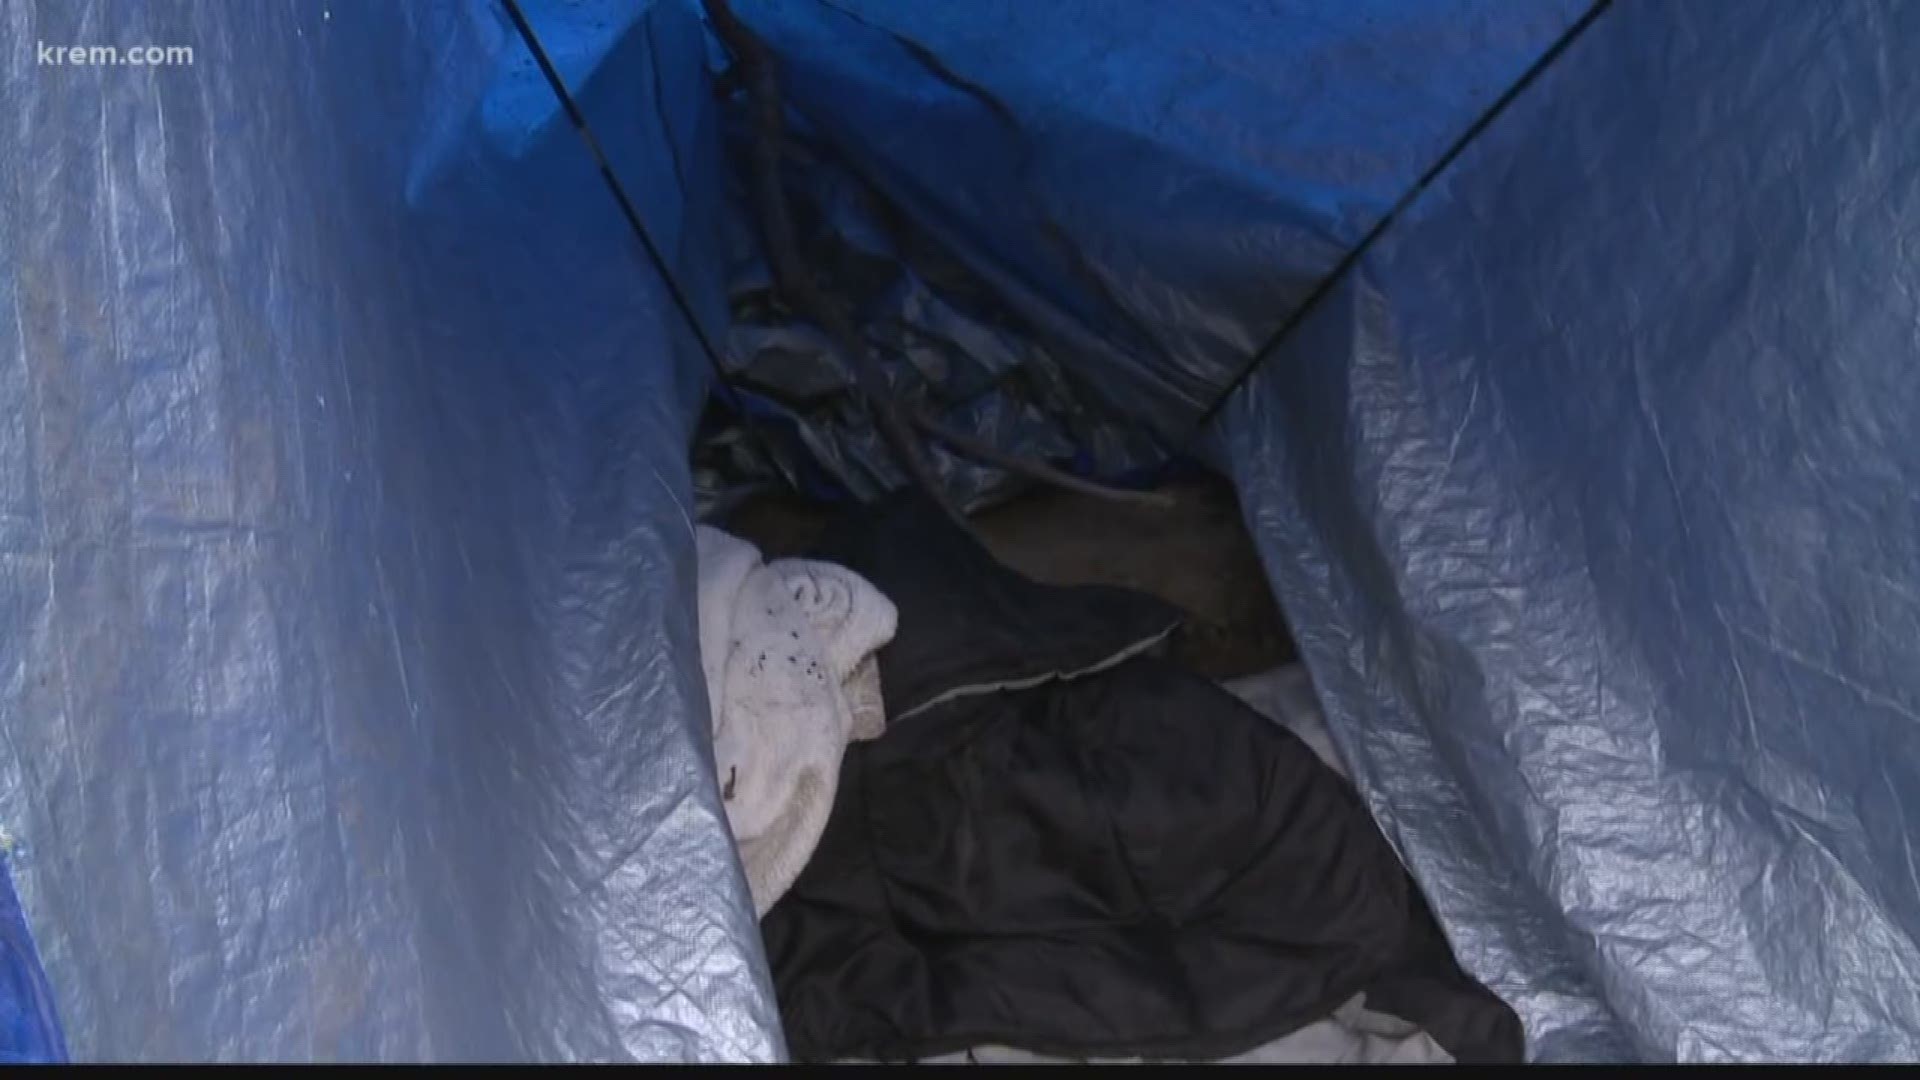 It's a new approach to dismantling homeless camps. The city of Spokane is trying to clean up camps faster. Outreach teams also work with people who are camping, to help connect them with the services they need.